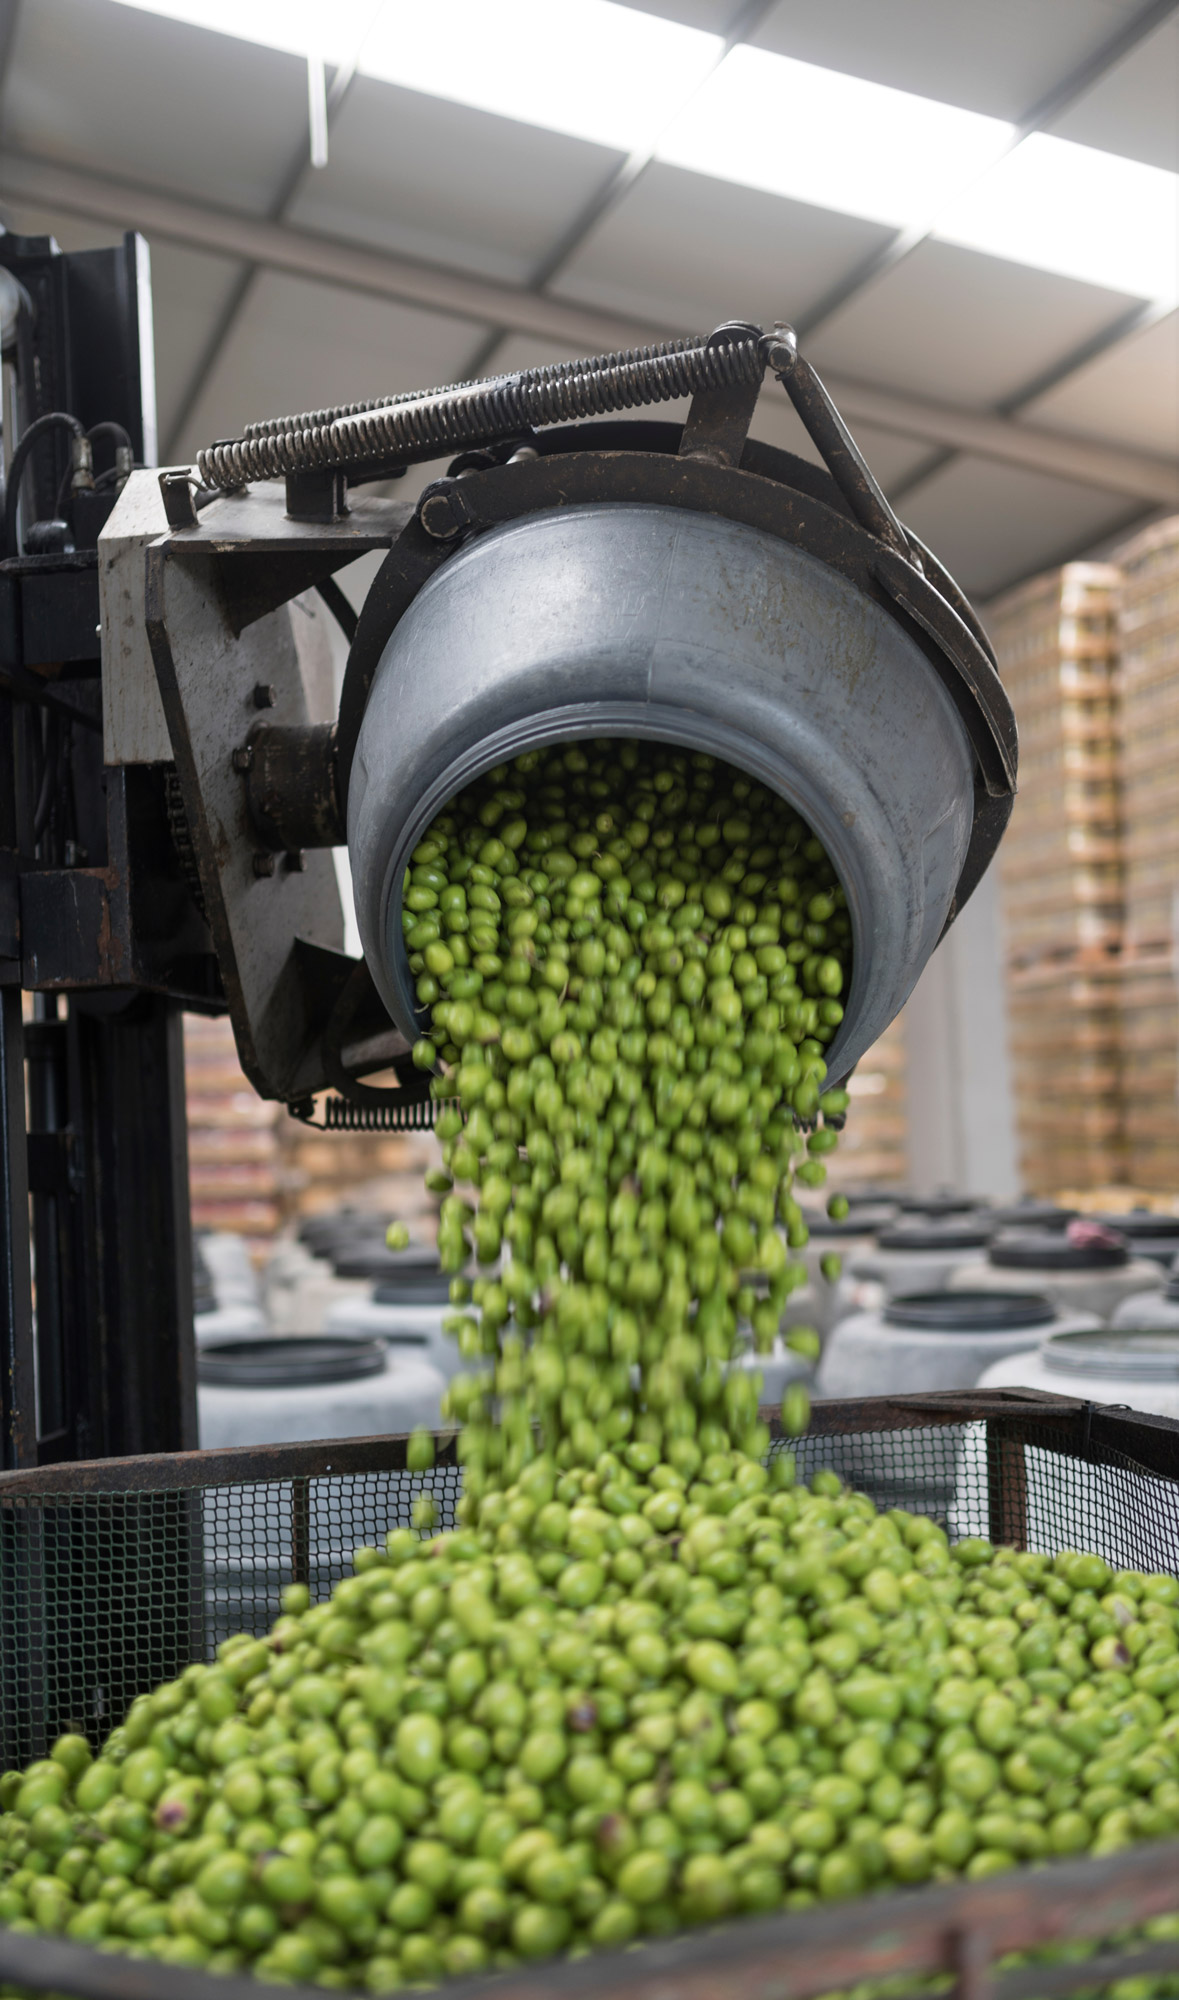 Machine emptying barrel of green olives into tank